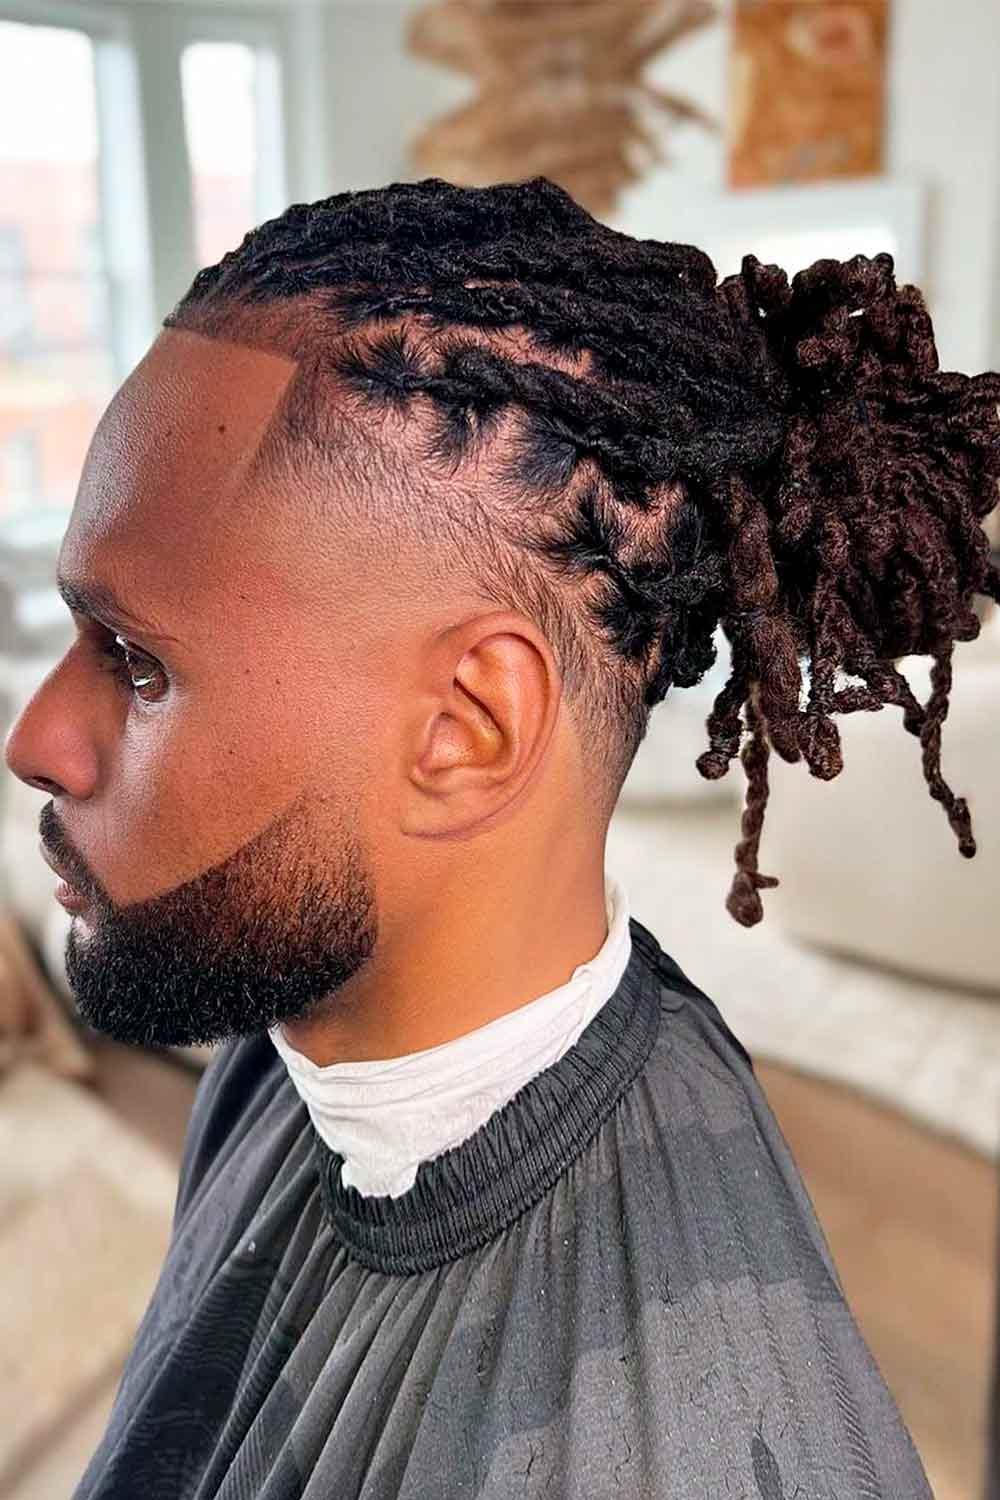 Hot Dreads Hairstyles for Black Men Must-see | New Natural Hairstyles |  Haircuts for men, Black men haircuts, Dreadlock hairstyles for men